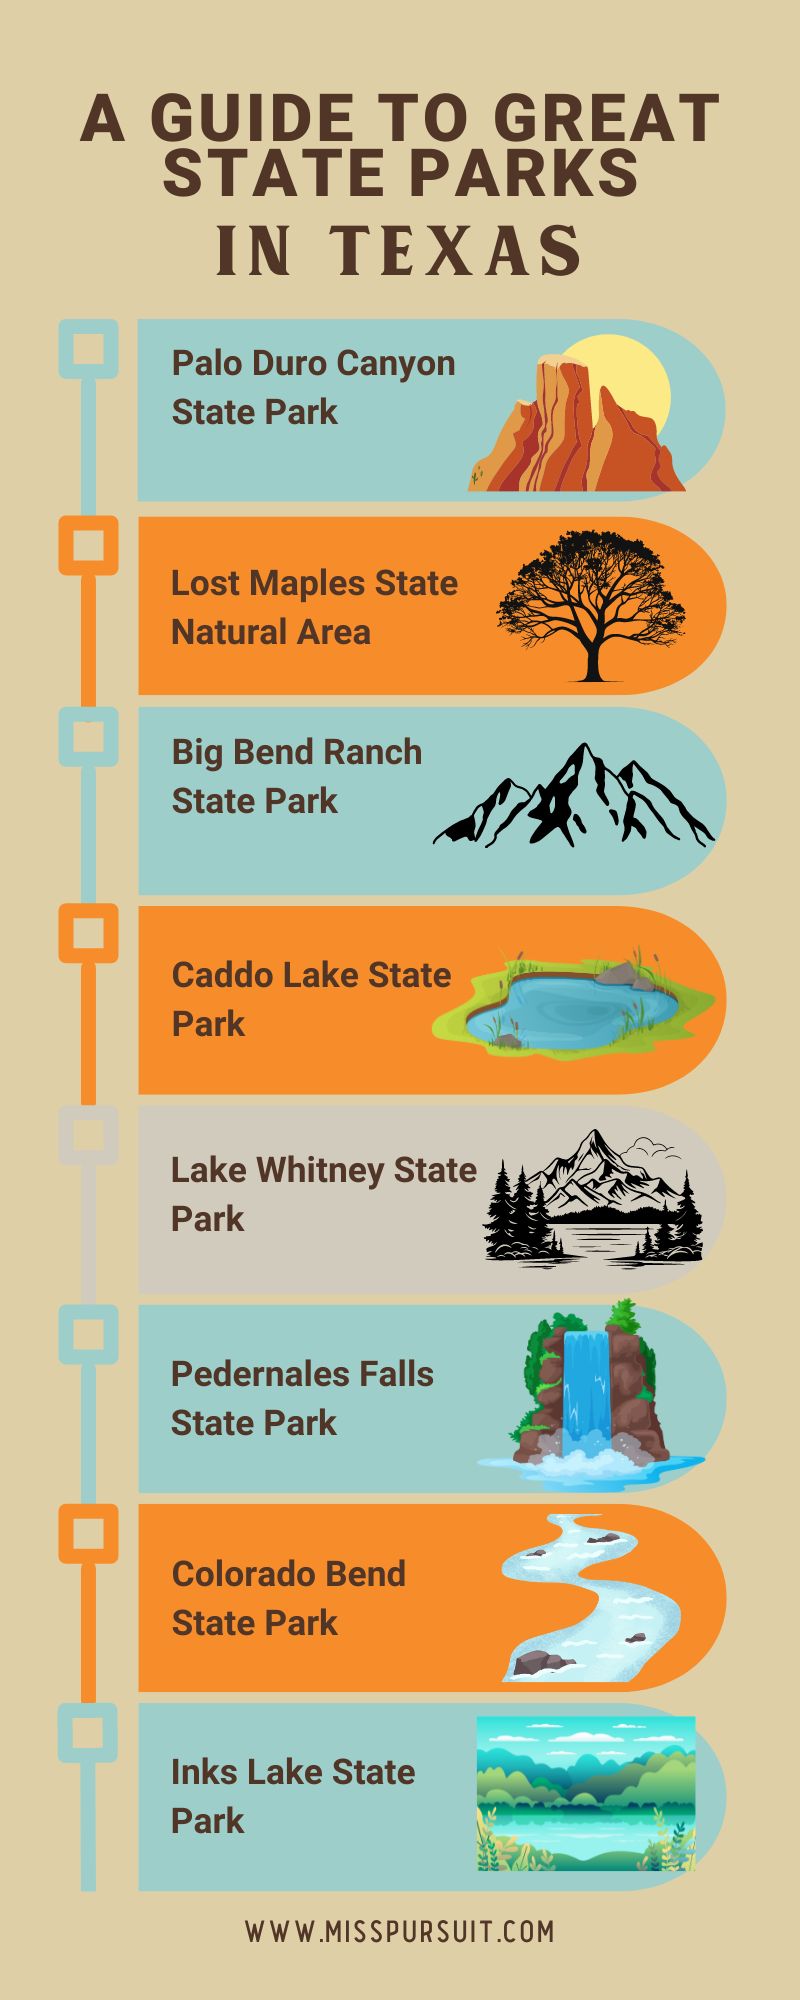  A Guide to Great State Parks in Texas